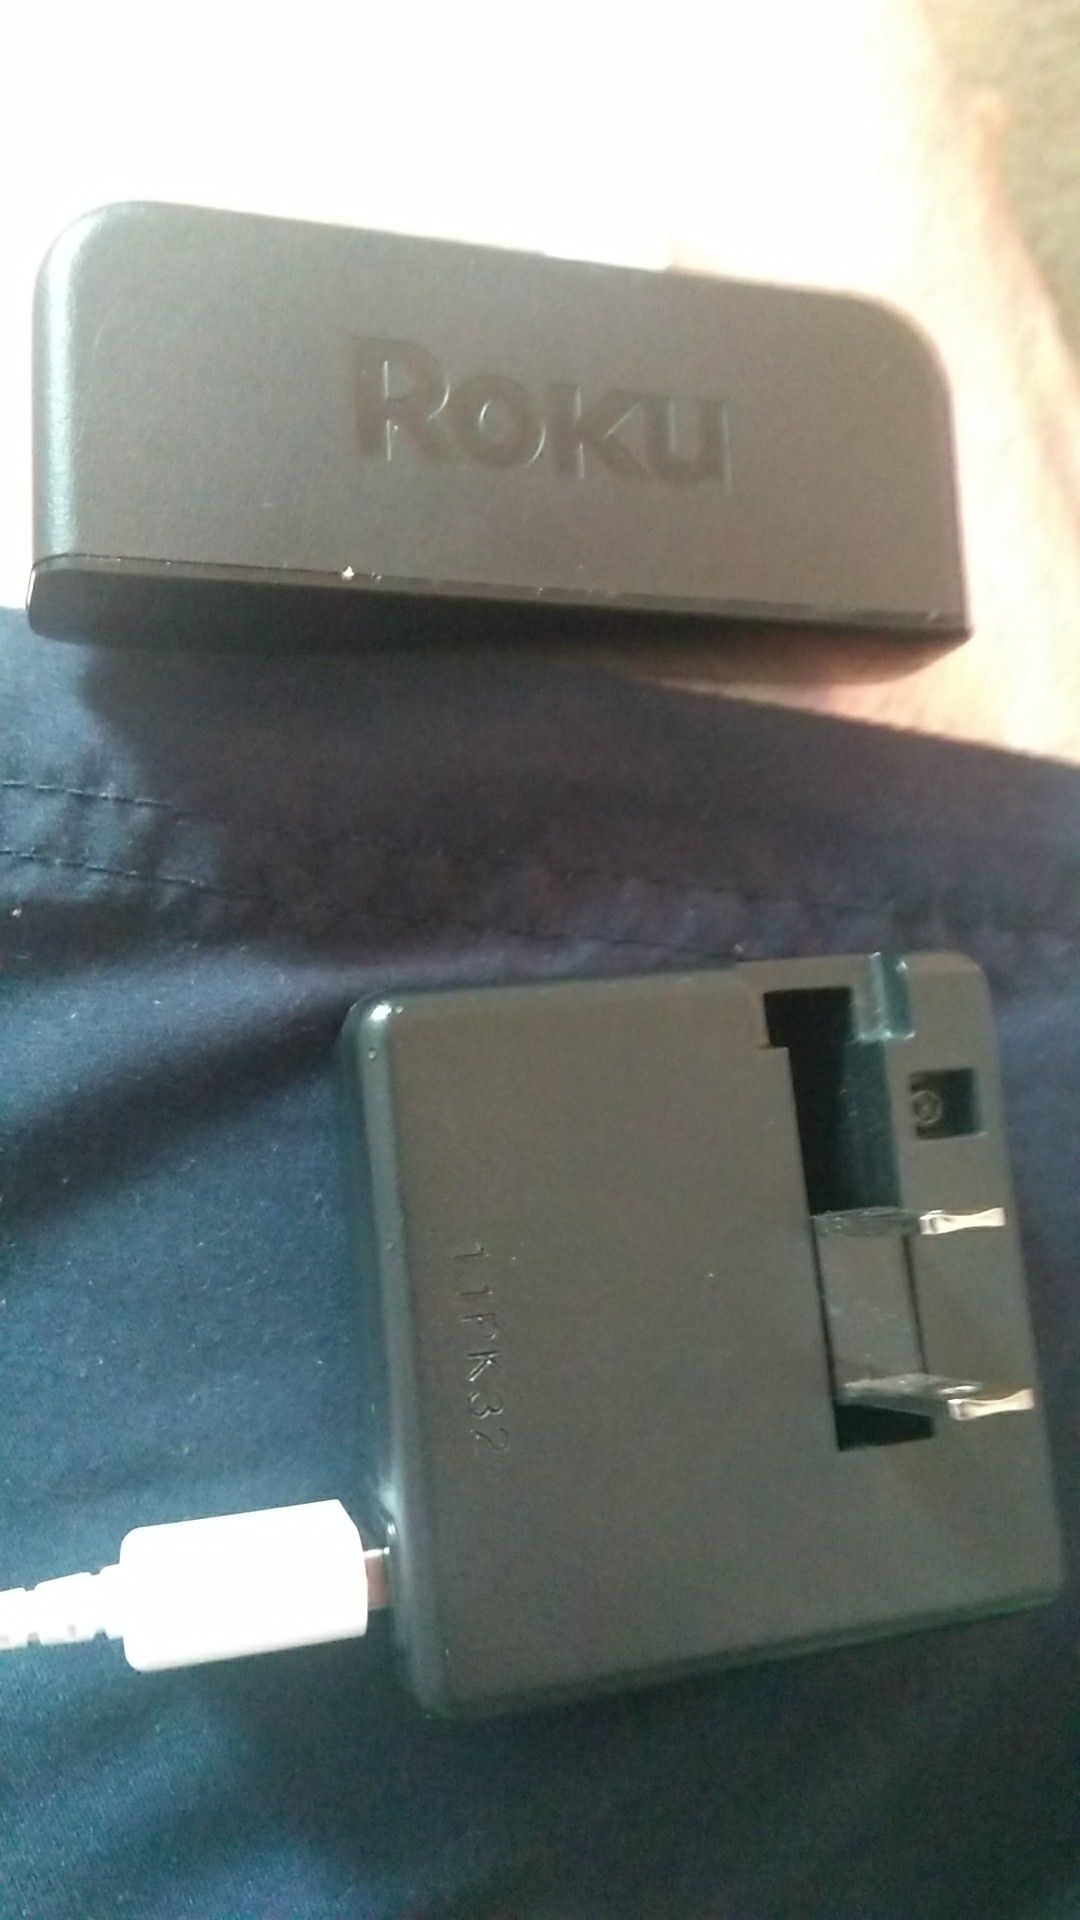 A Roku tv stick all that's missing is a HDMI cord.